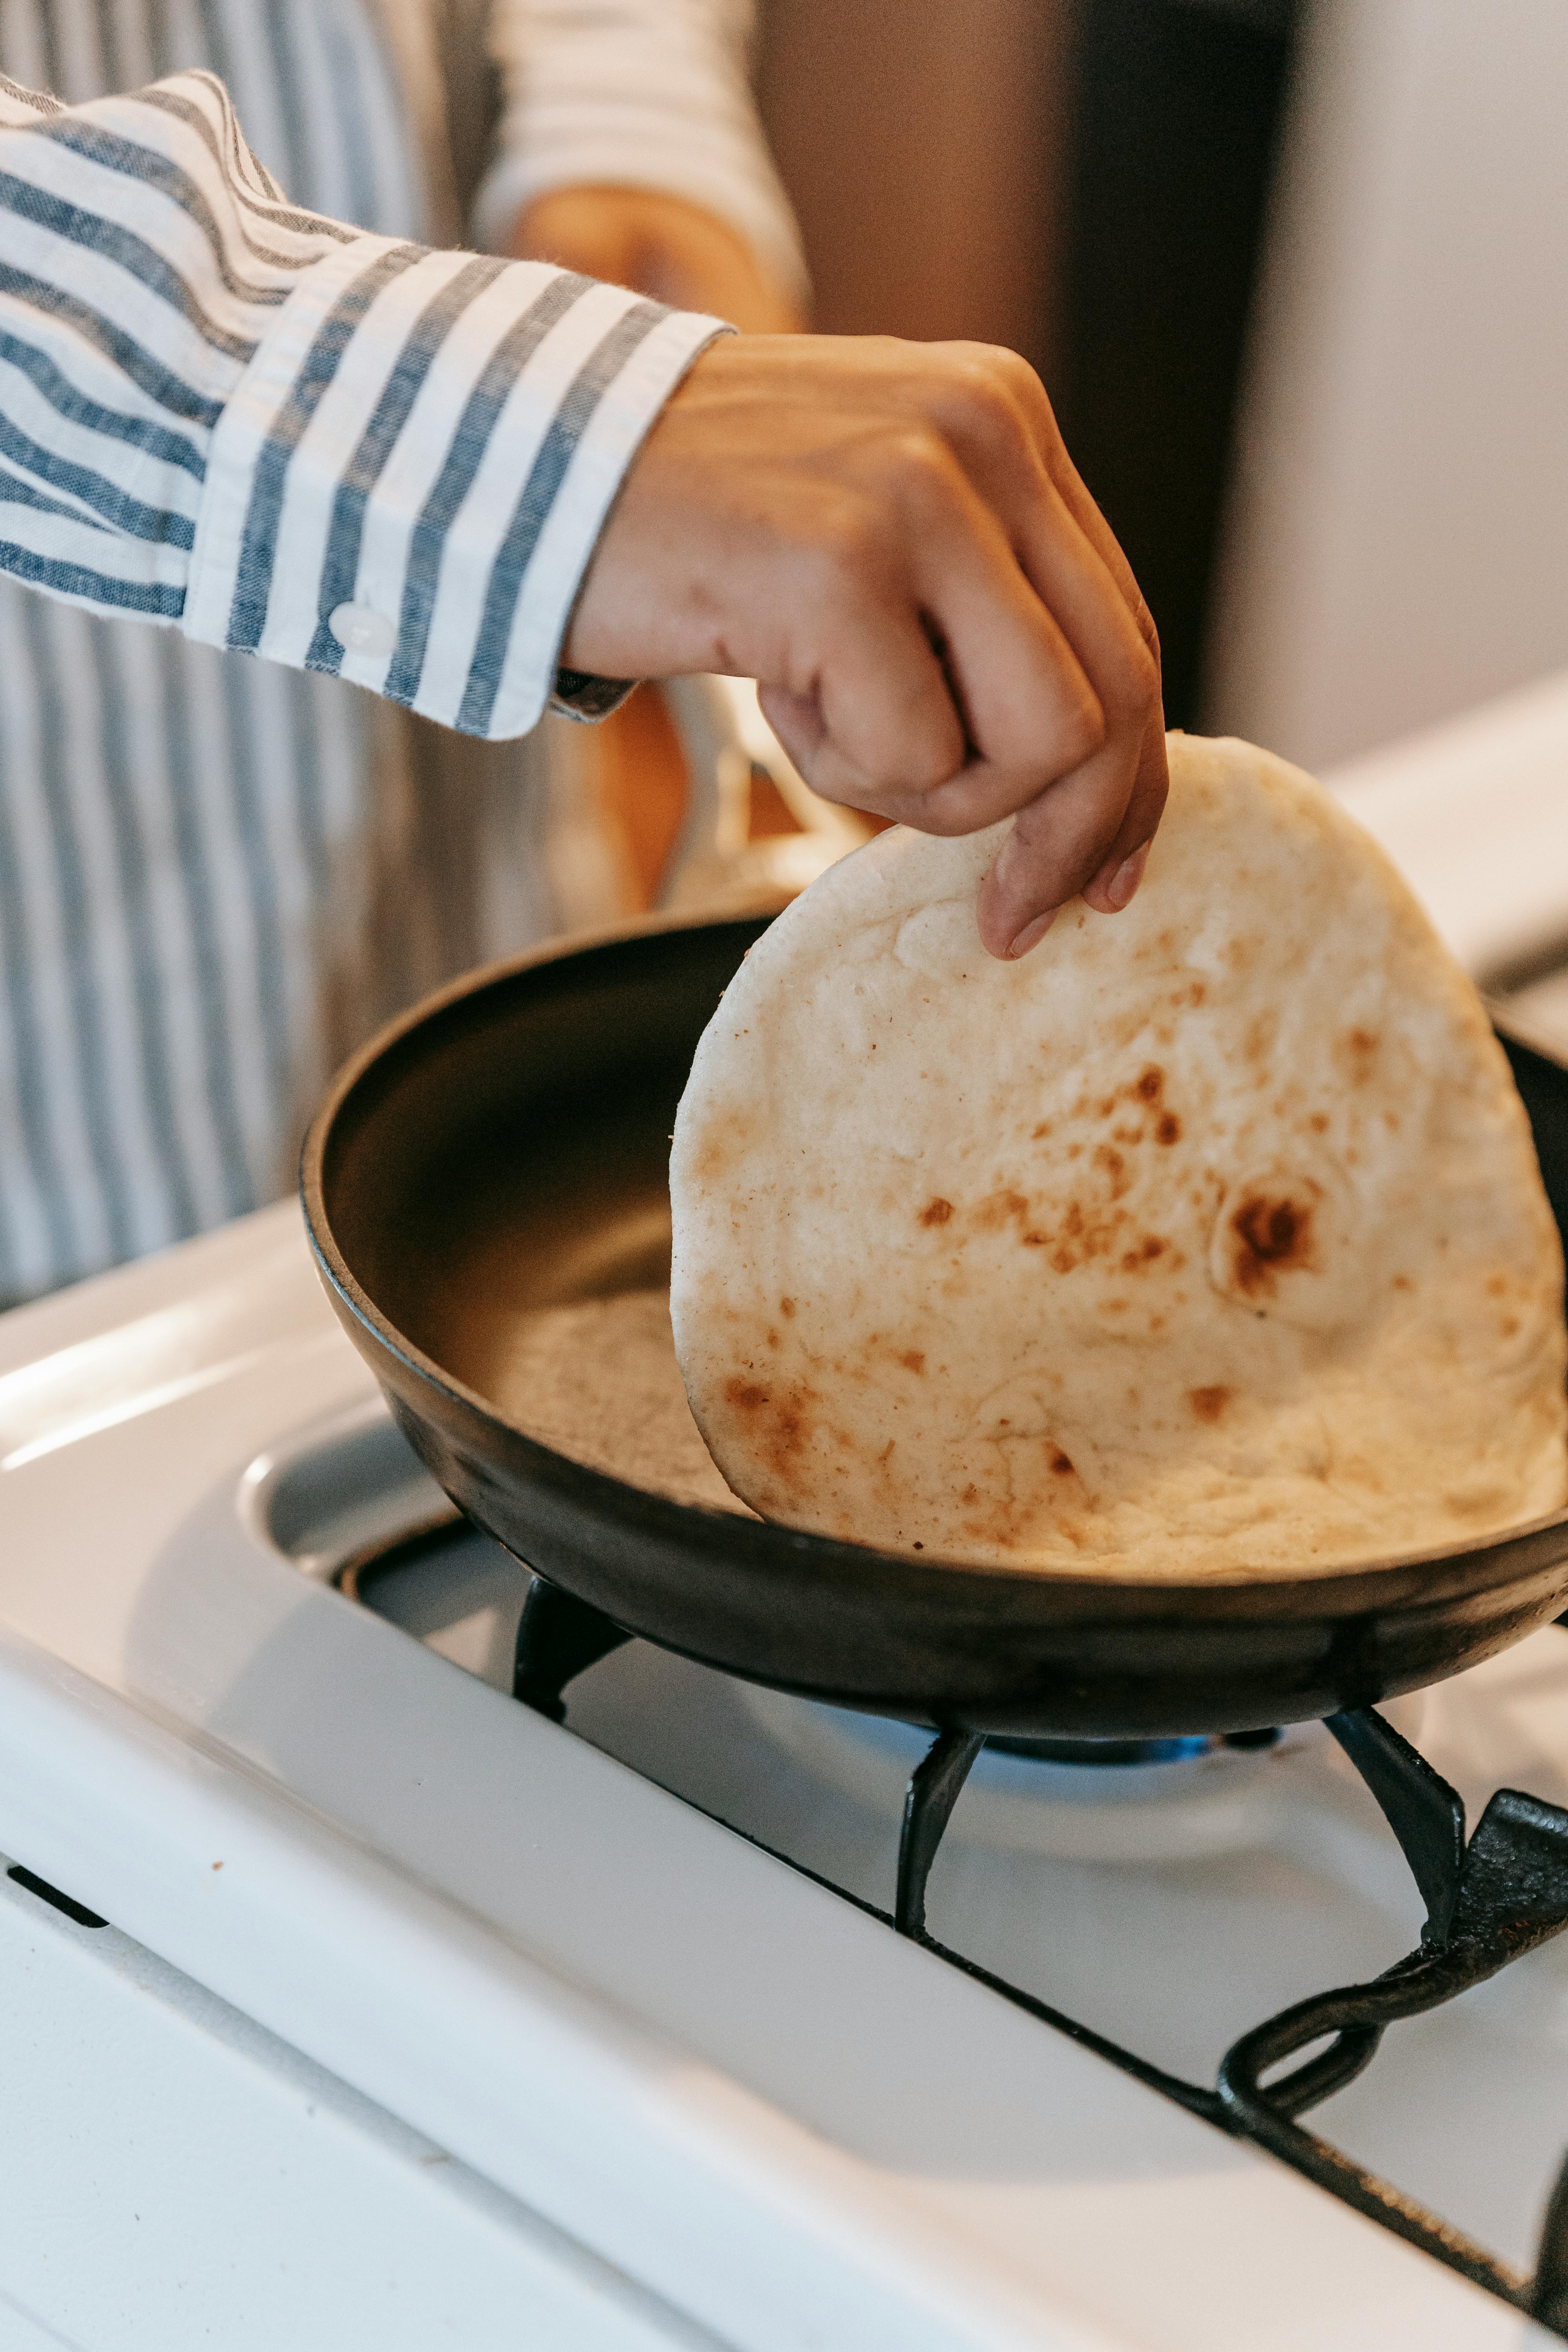 Flour, water, tears and a lifetime of making roti | SBS Food